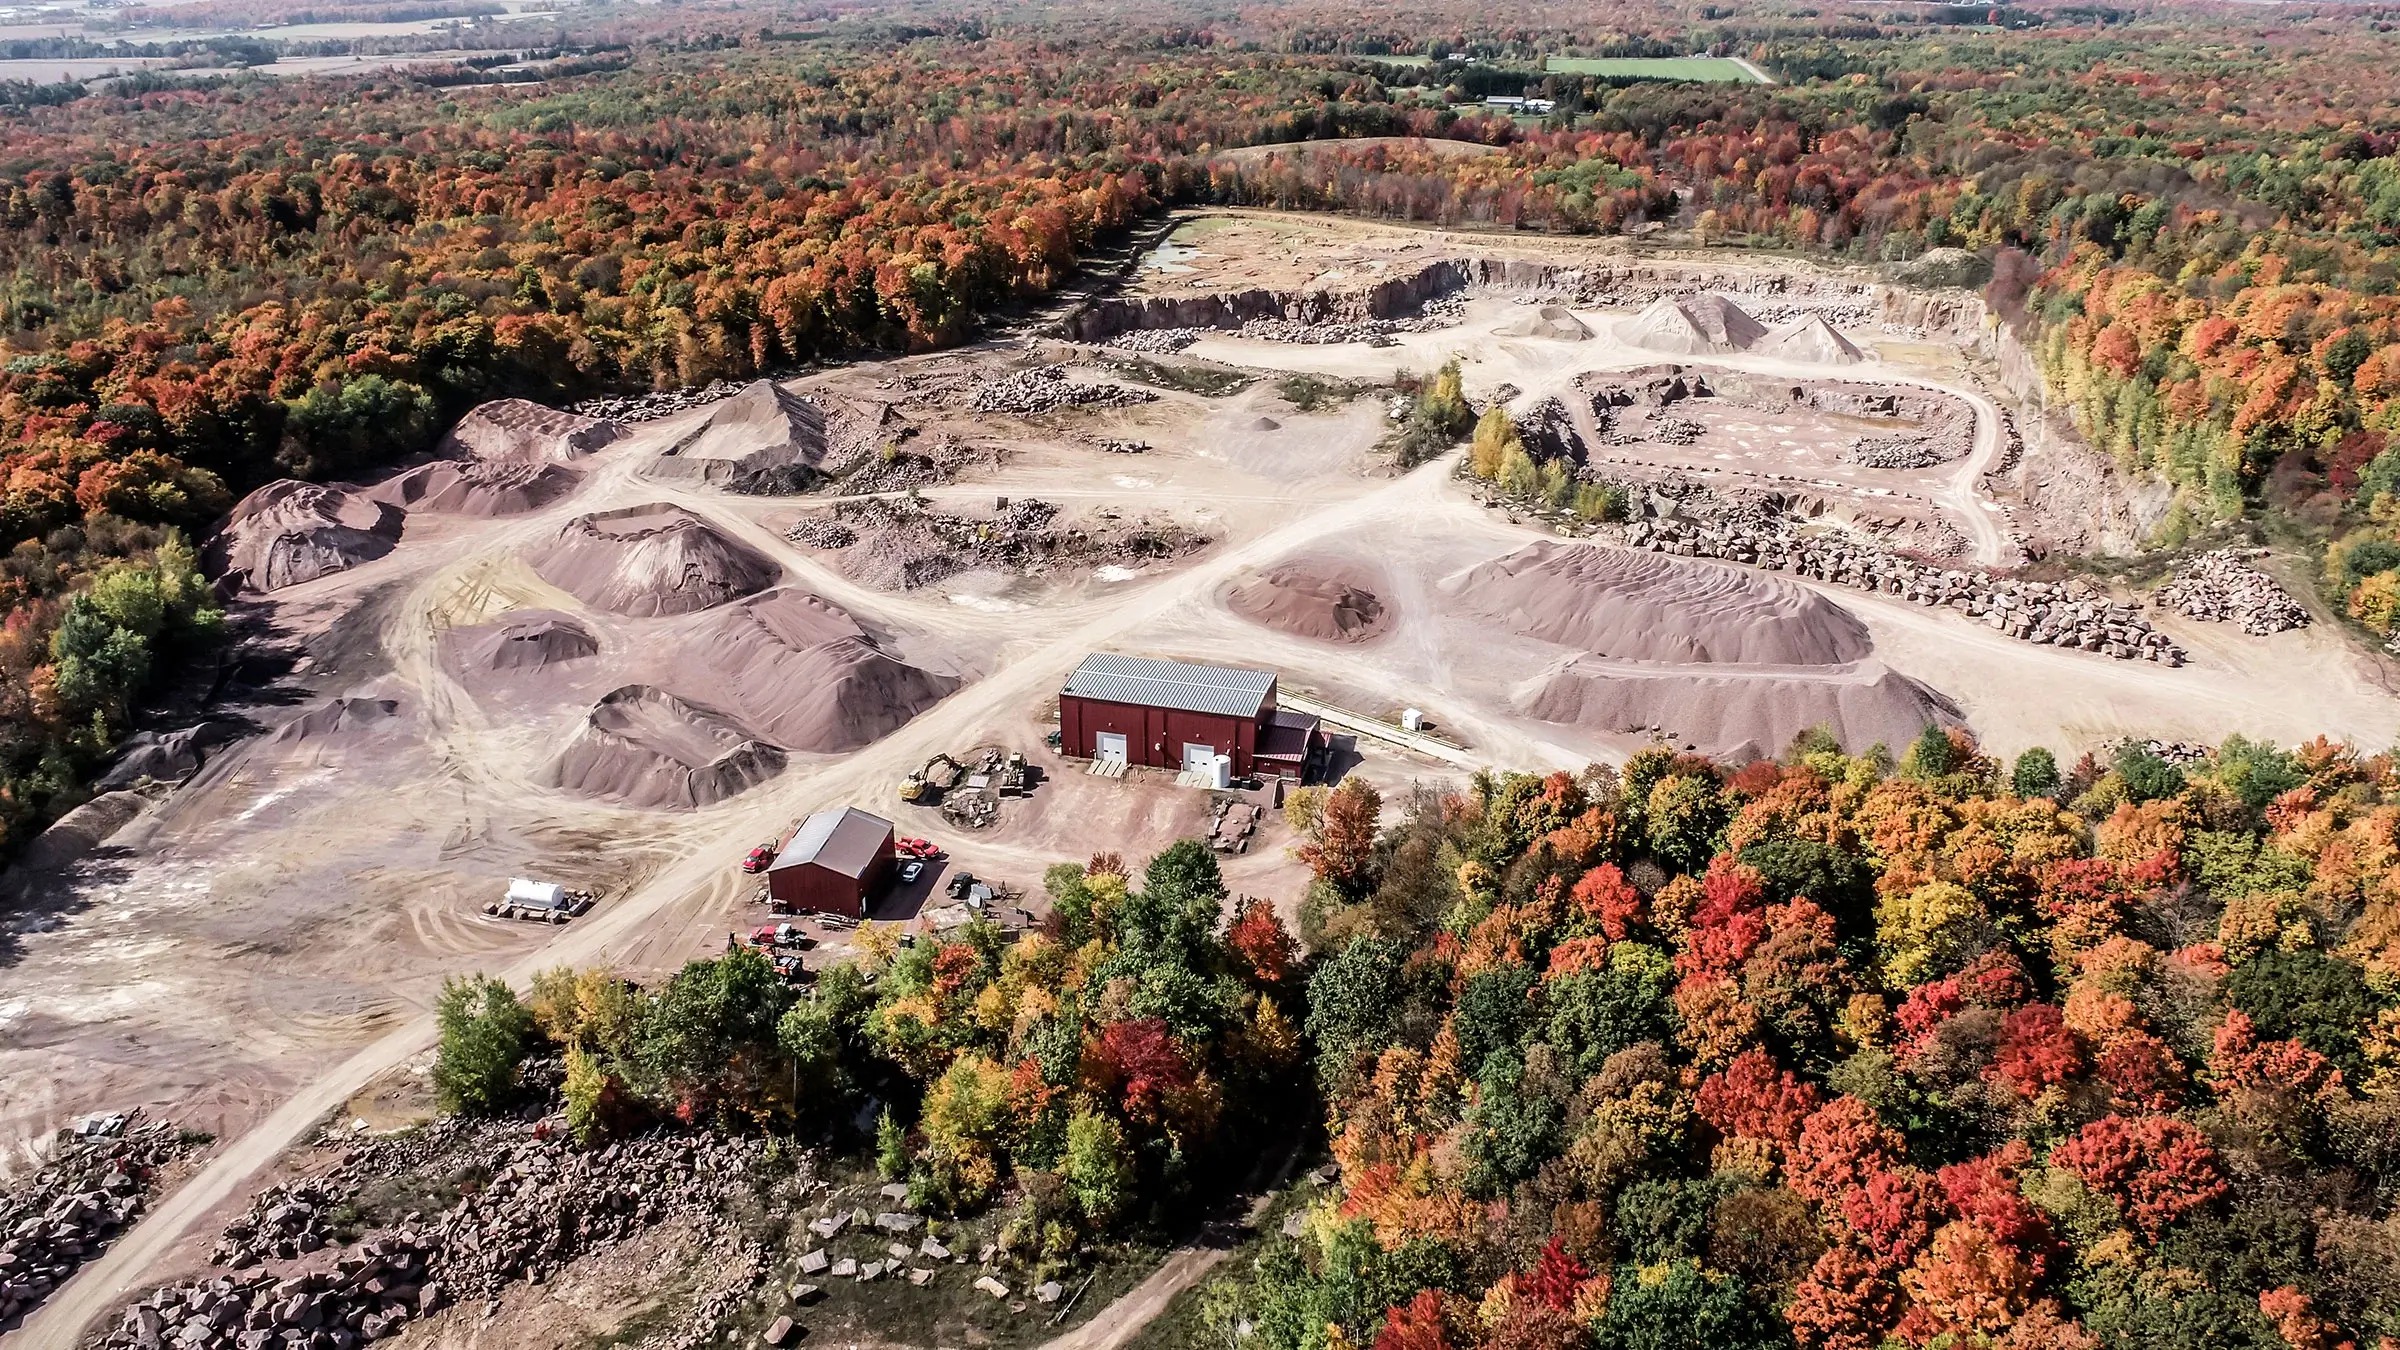 A large quarry surrounded by an autumn forest